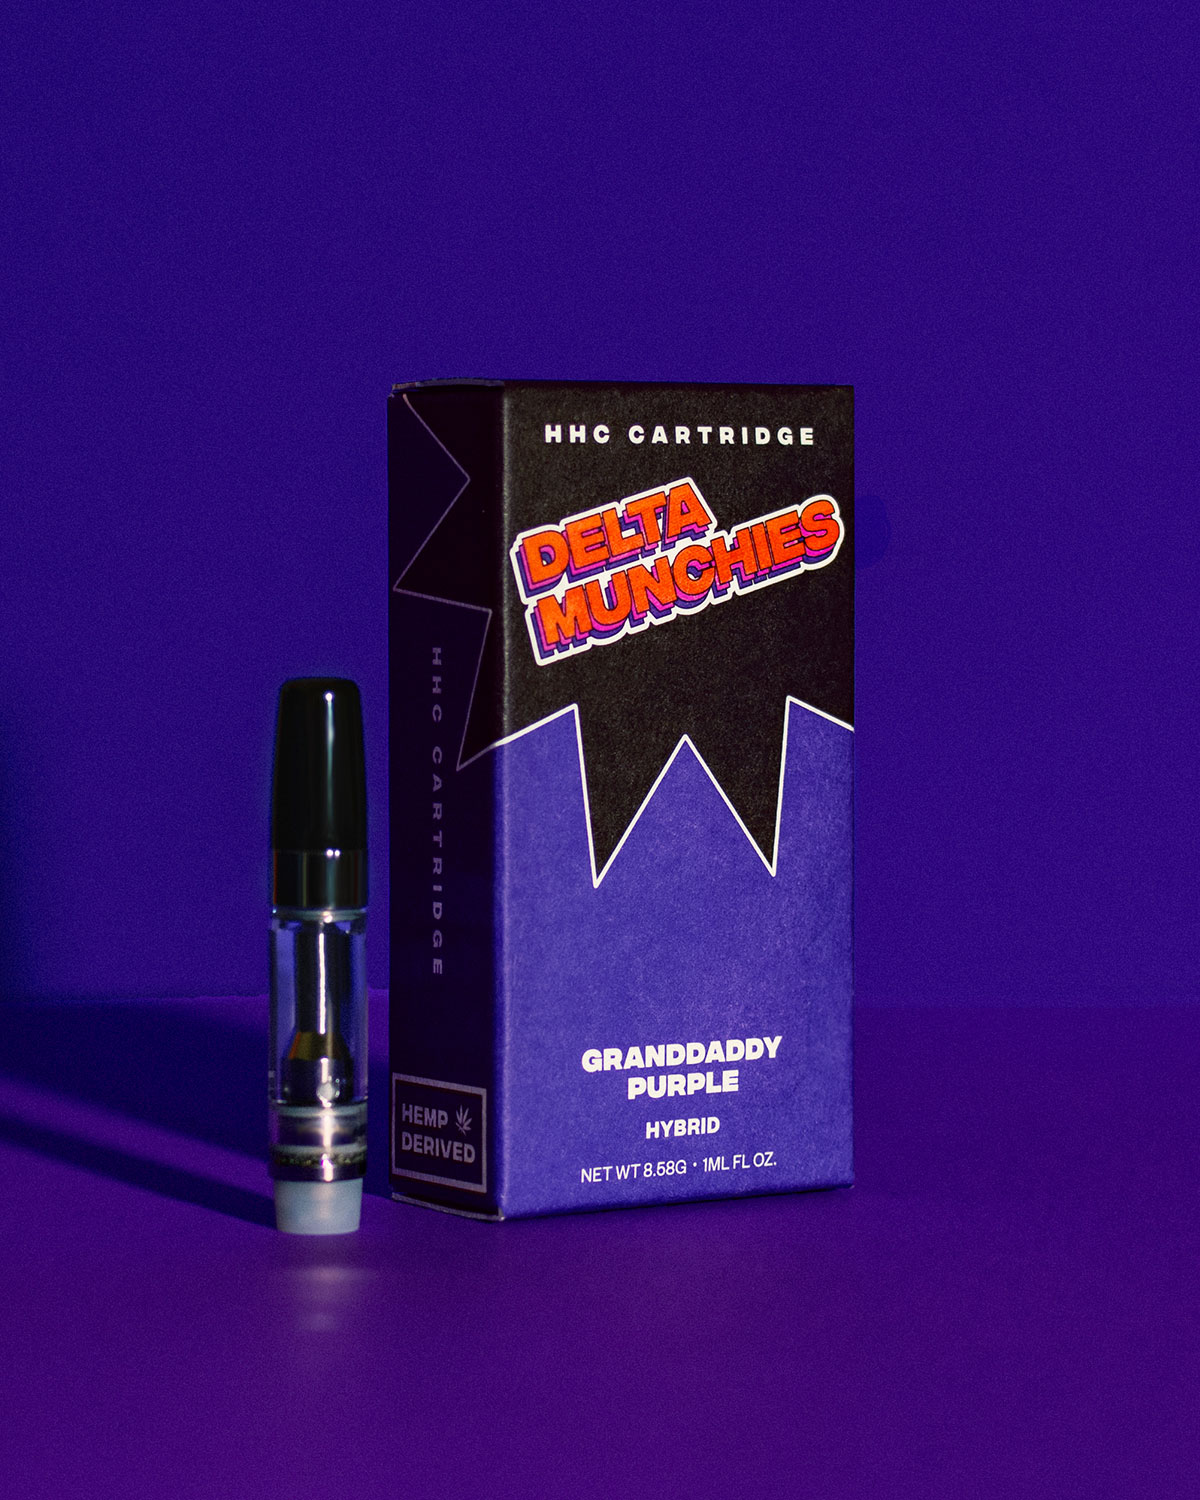 Delta Munchies HHC Grand daddy purp Cartridge product image on a purple background